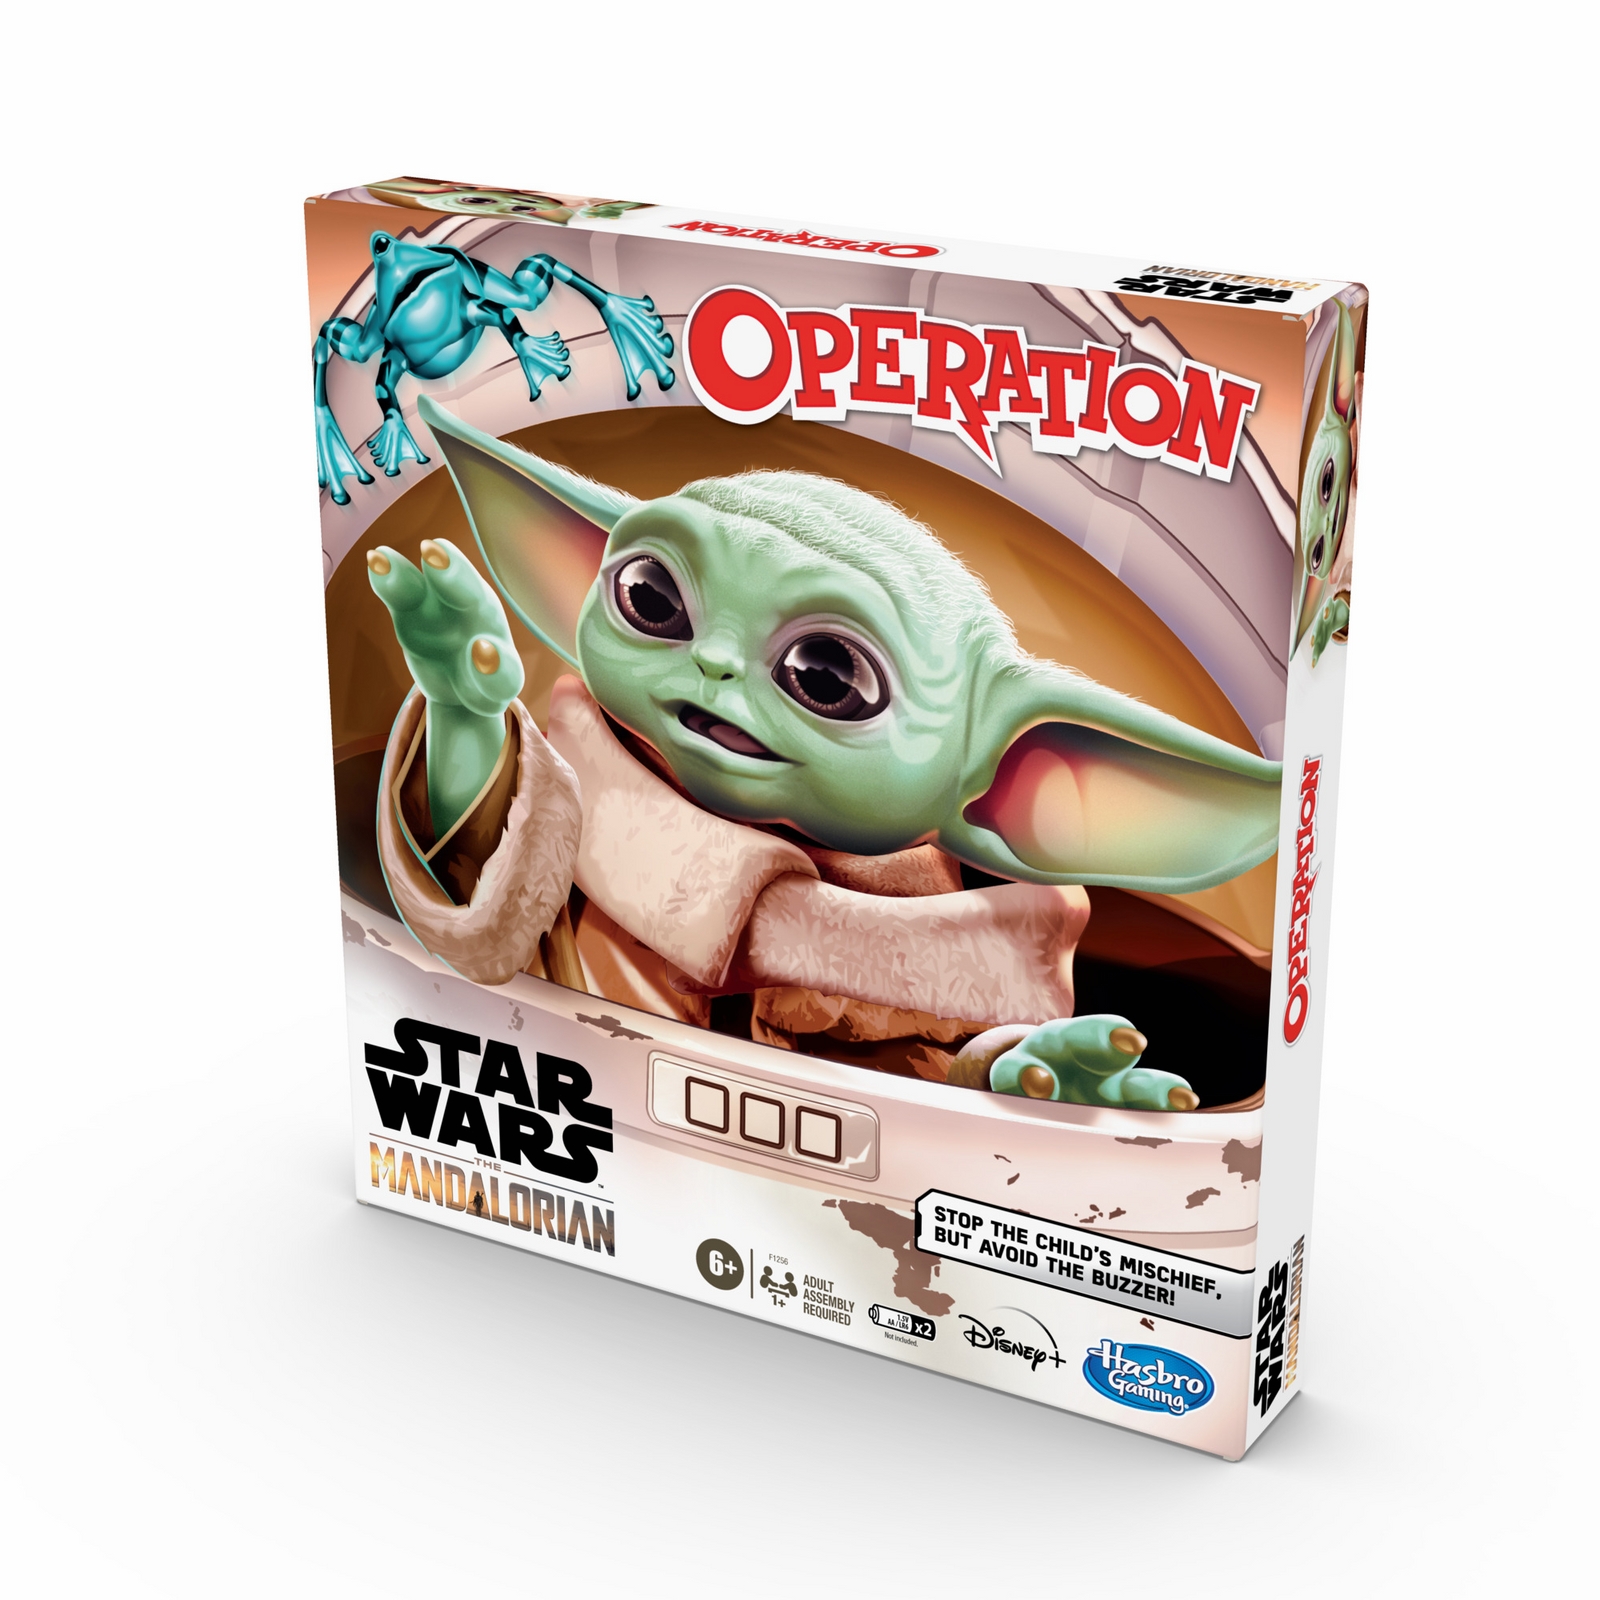 OPERATION-STAR-WARS-THE-MANDALORIAN-EDITION-Game-in-pck-3.jpg